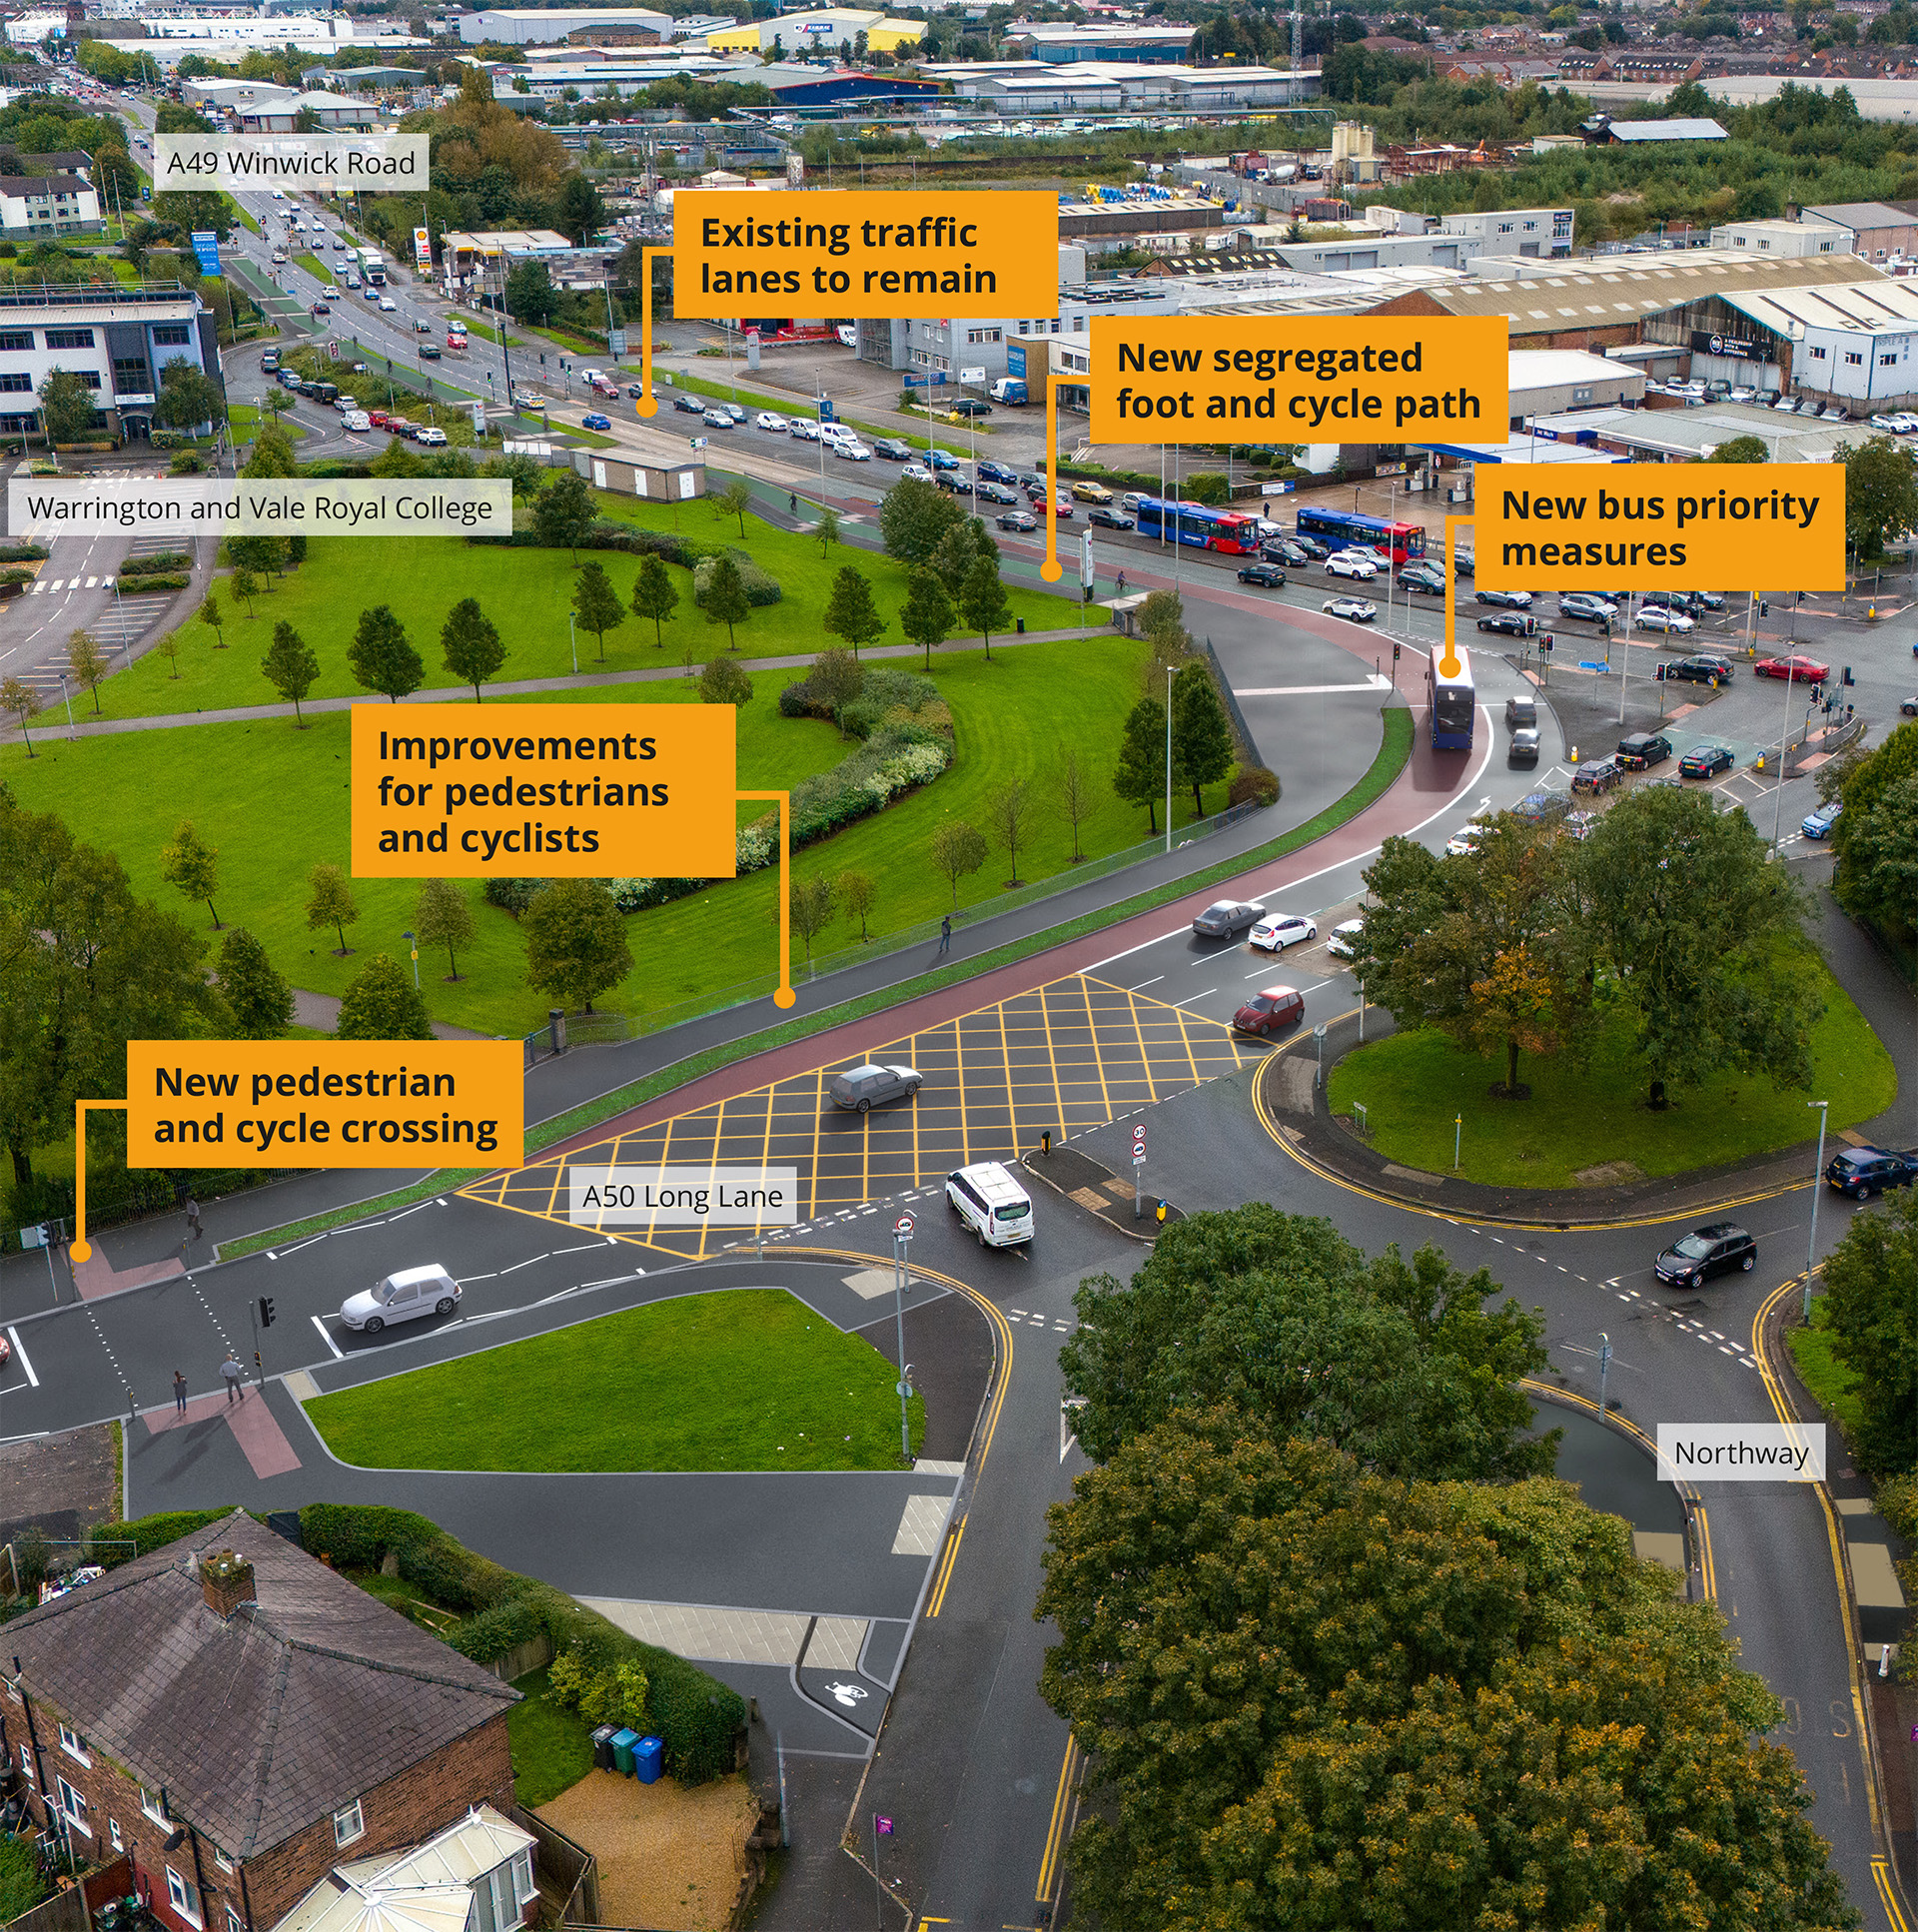 Bus priority improvements on the junction of the A50 Long Lane and A49 Winwick Road.  The picture also shows active travel improvements along Long Lane outside Warrington & Vale Royal College on the westbound carriageway in the form of shared space pedestrian and cycle path.  Active travel improvements along Winwick Road shown is new or improved lengths of segregated foot and cycleway.  The image also shows a new Toucan crossing which is proposed on Long Lane adjacent to the college access.